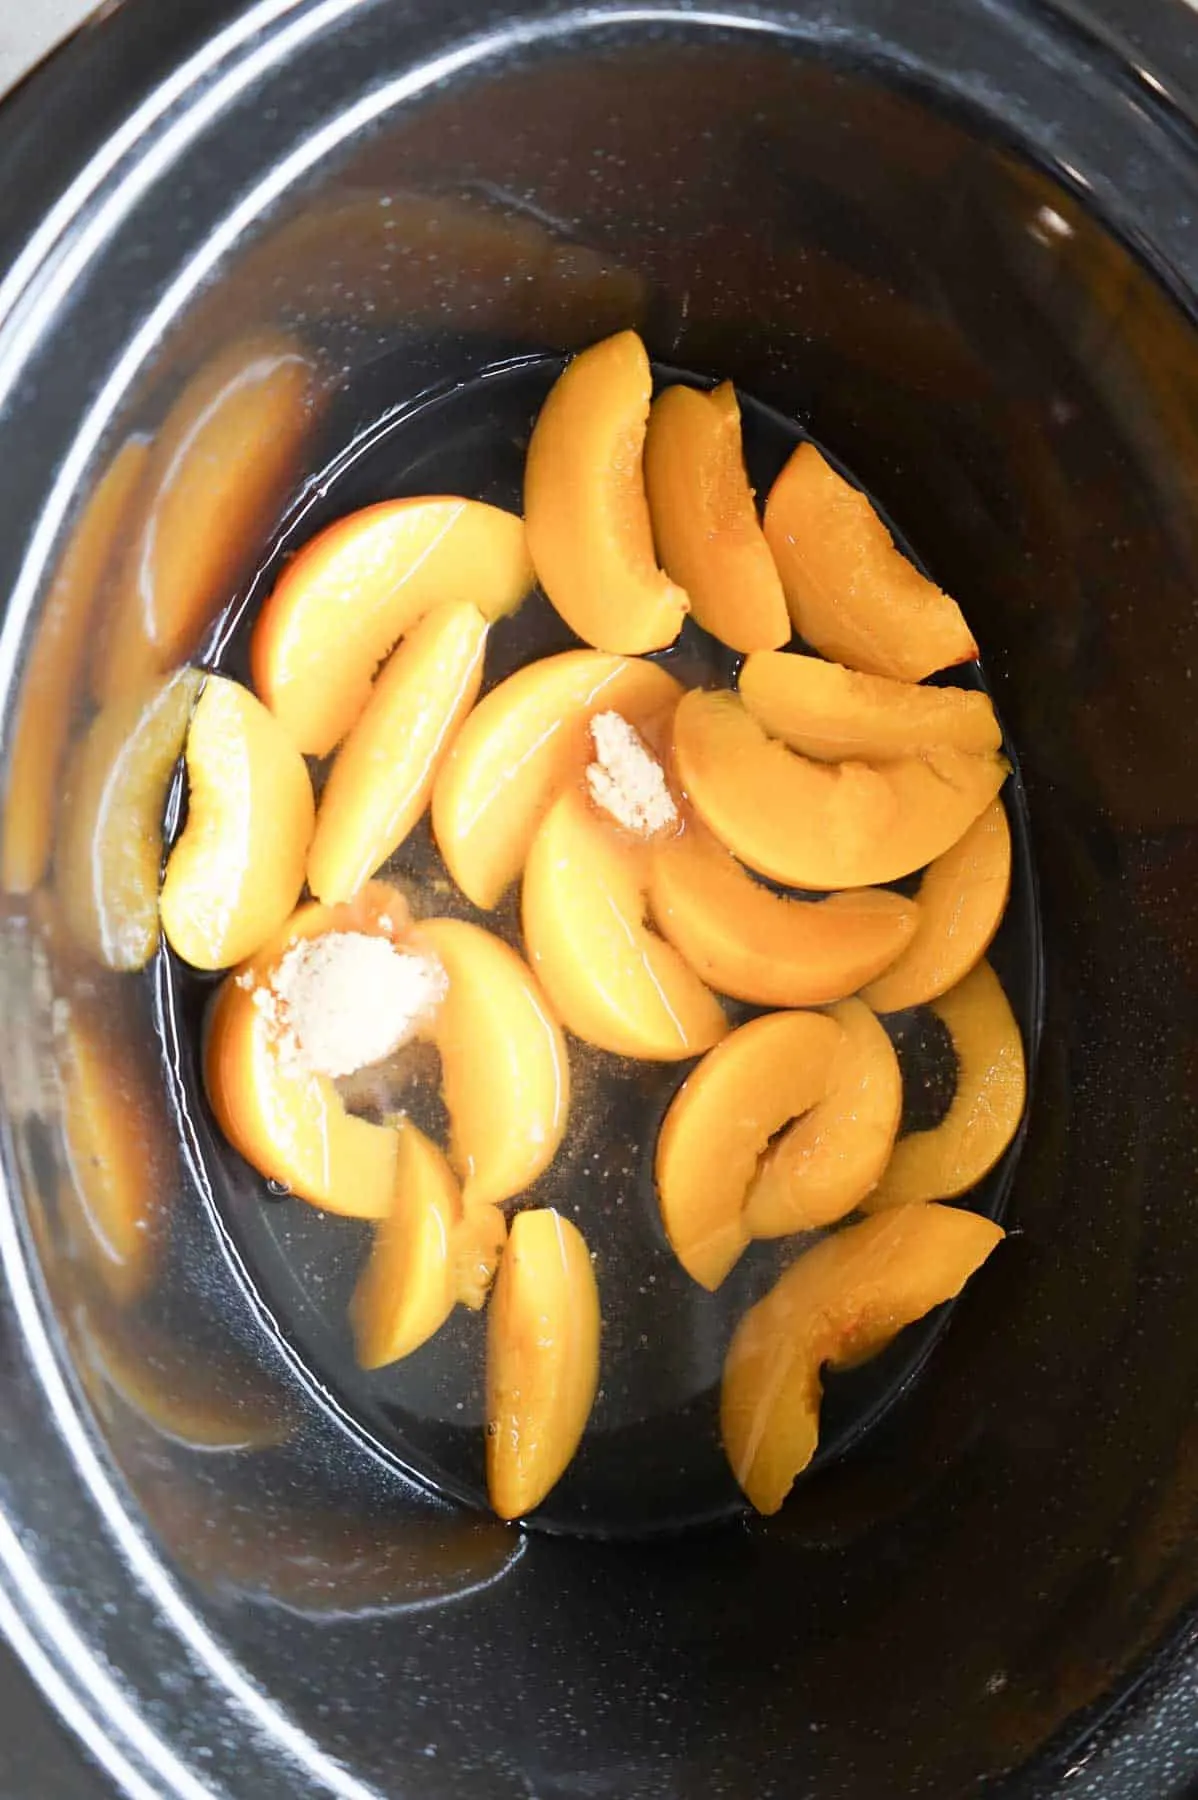 brown sugar on top of canned peach slices in a crock pot